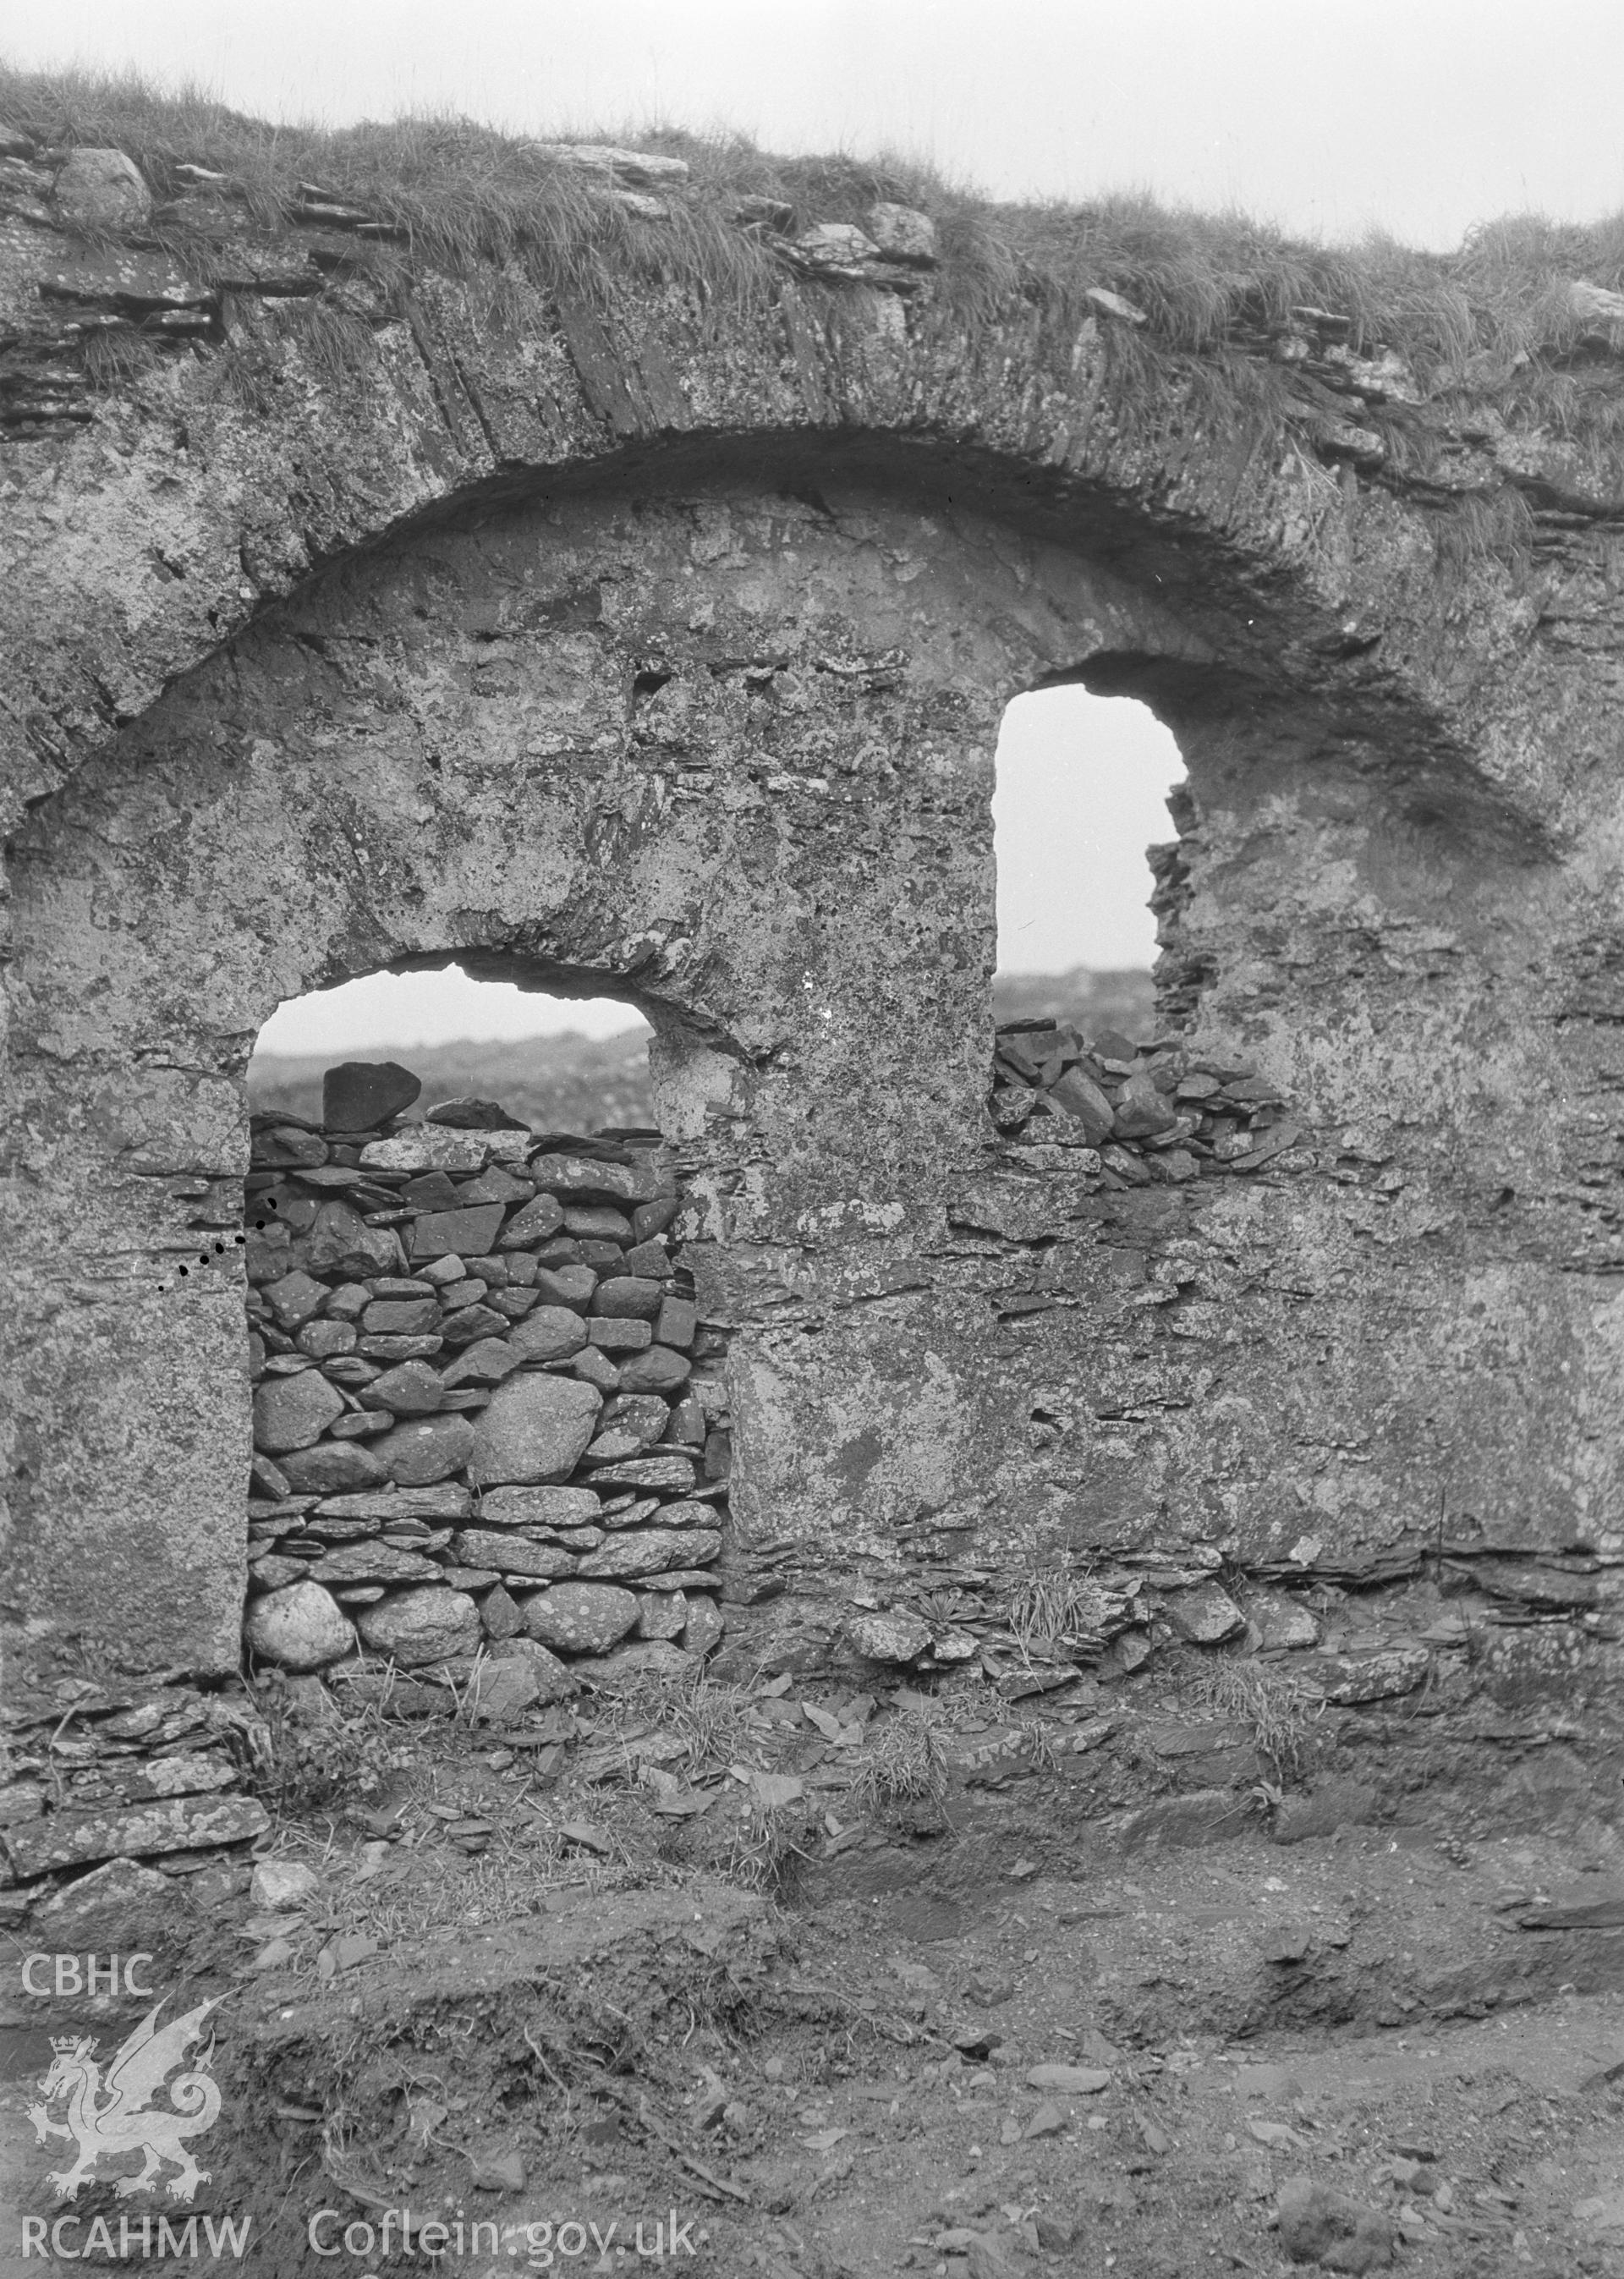 Digital copy of a black and white negative showing St Justinian's Chapel.